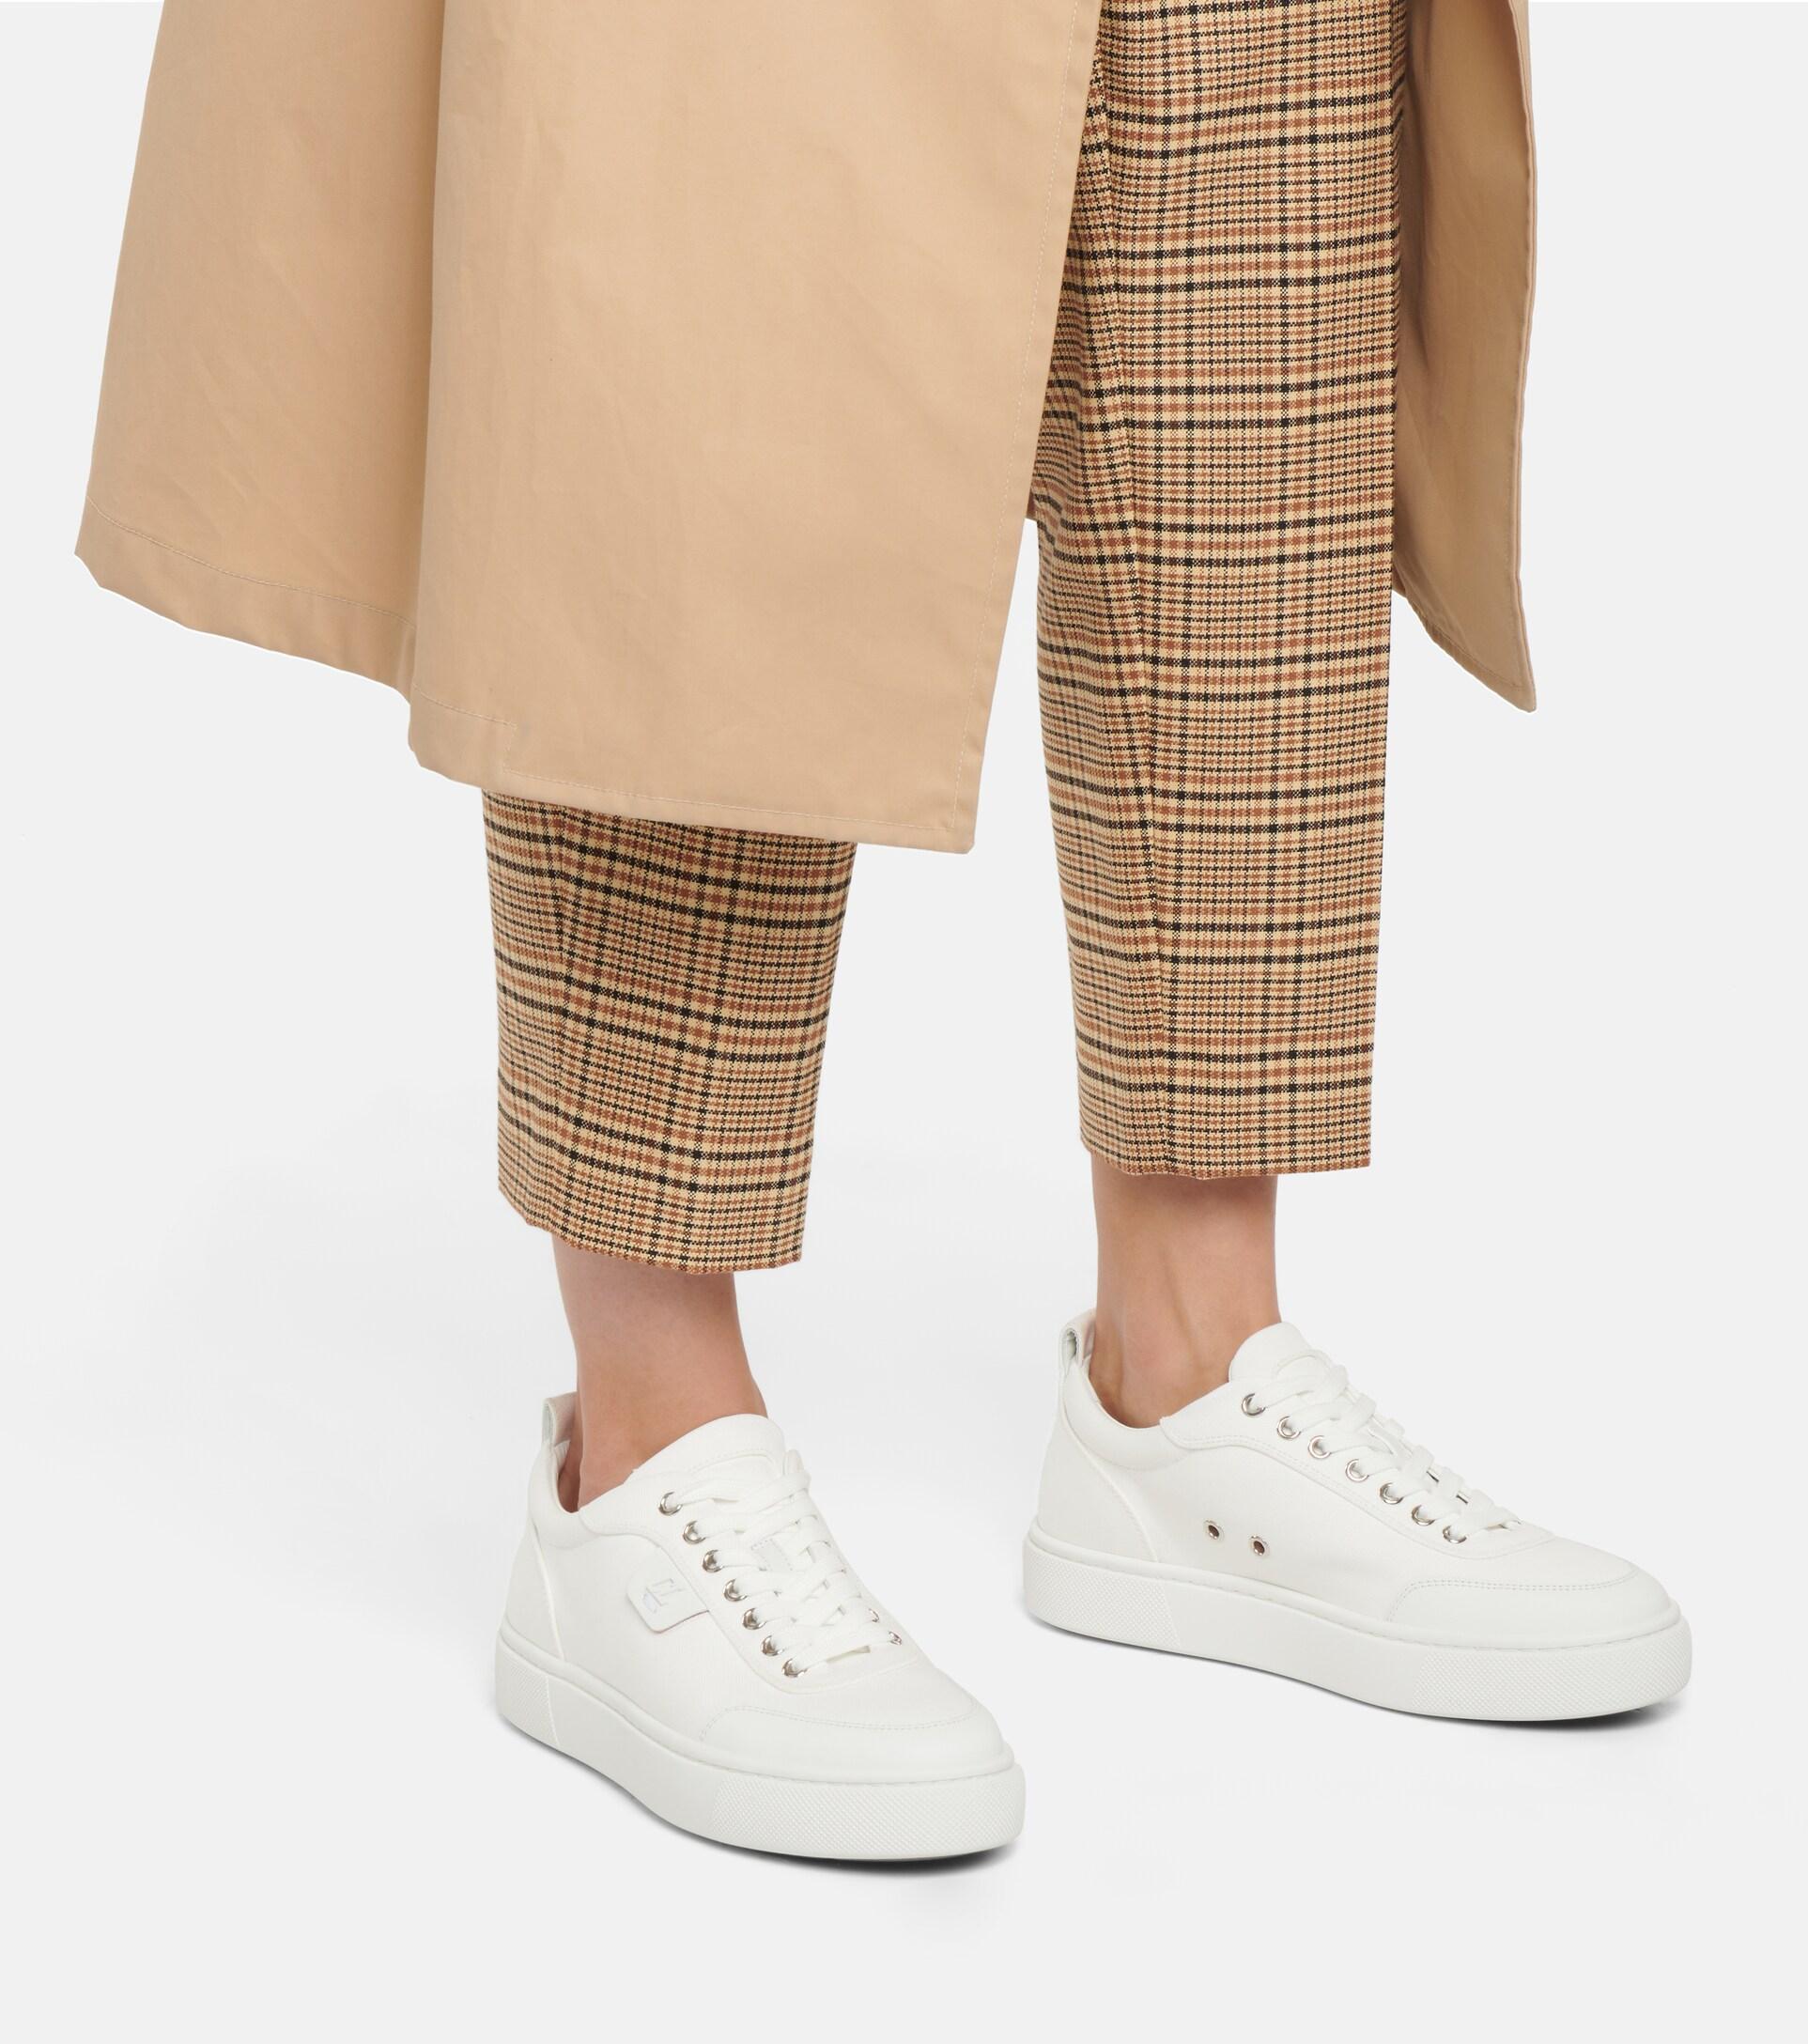 Christian Louboutin Simplerui Canvas Sneakers in White | Lyst